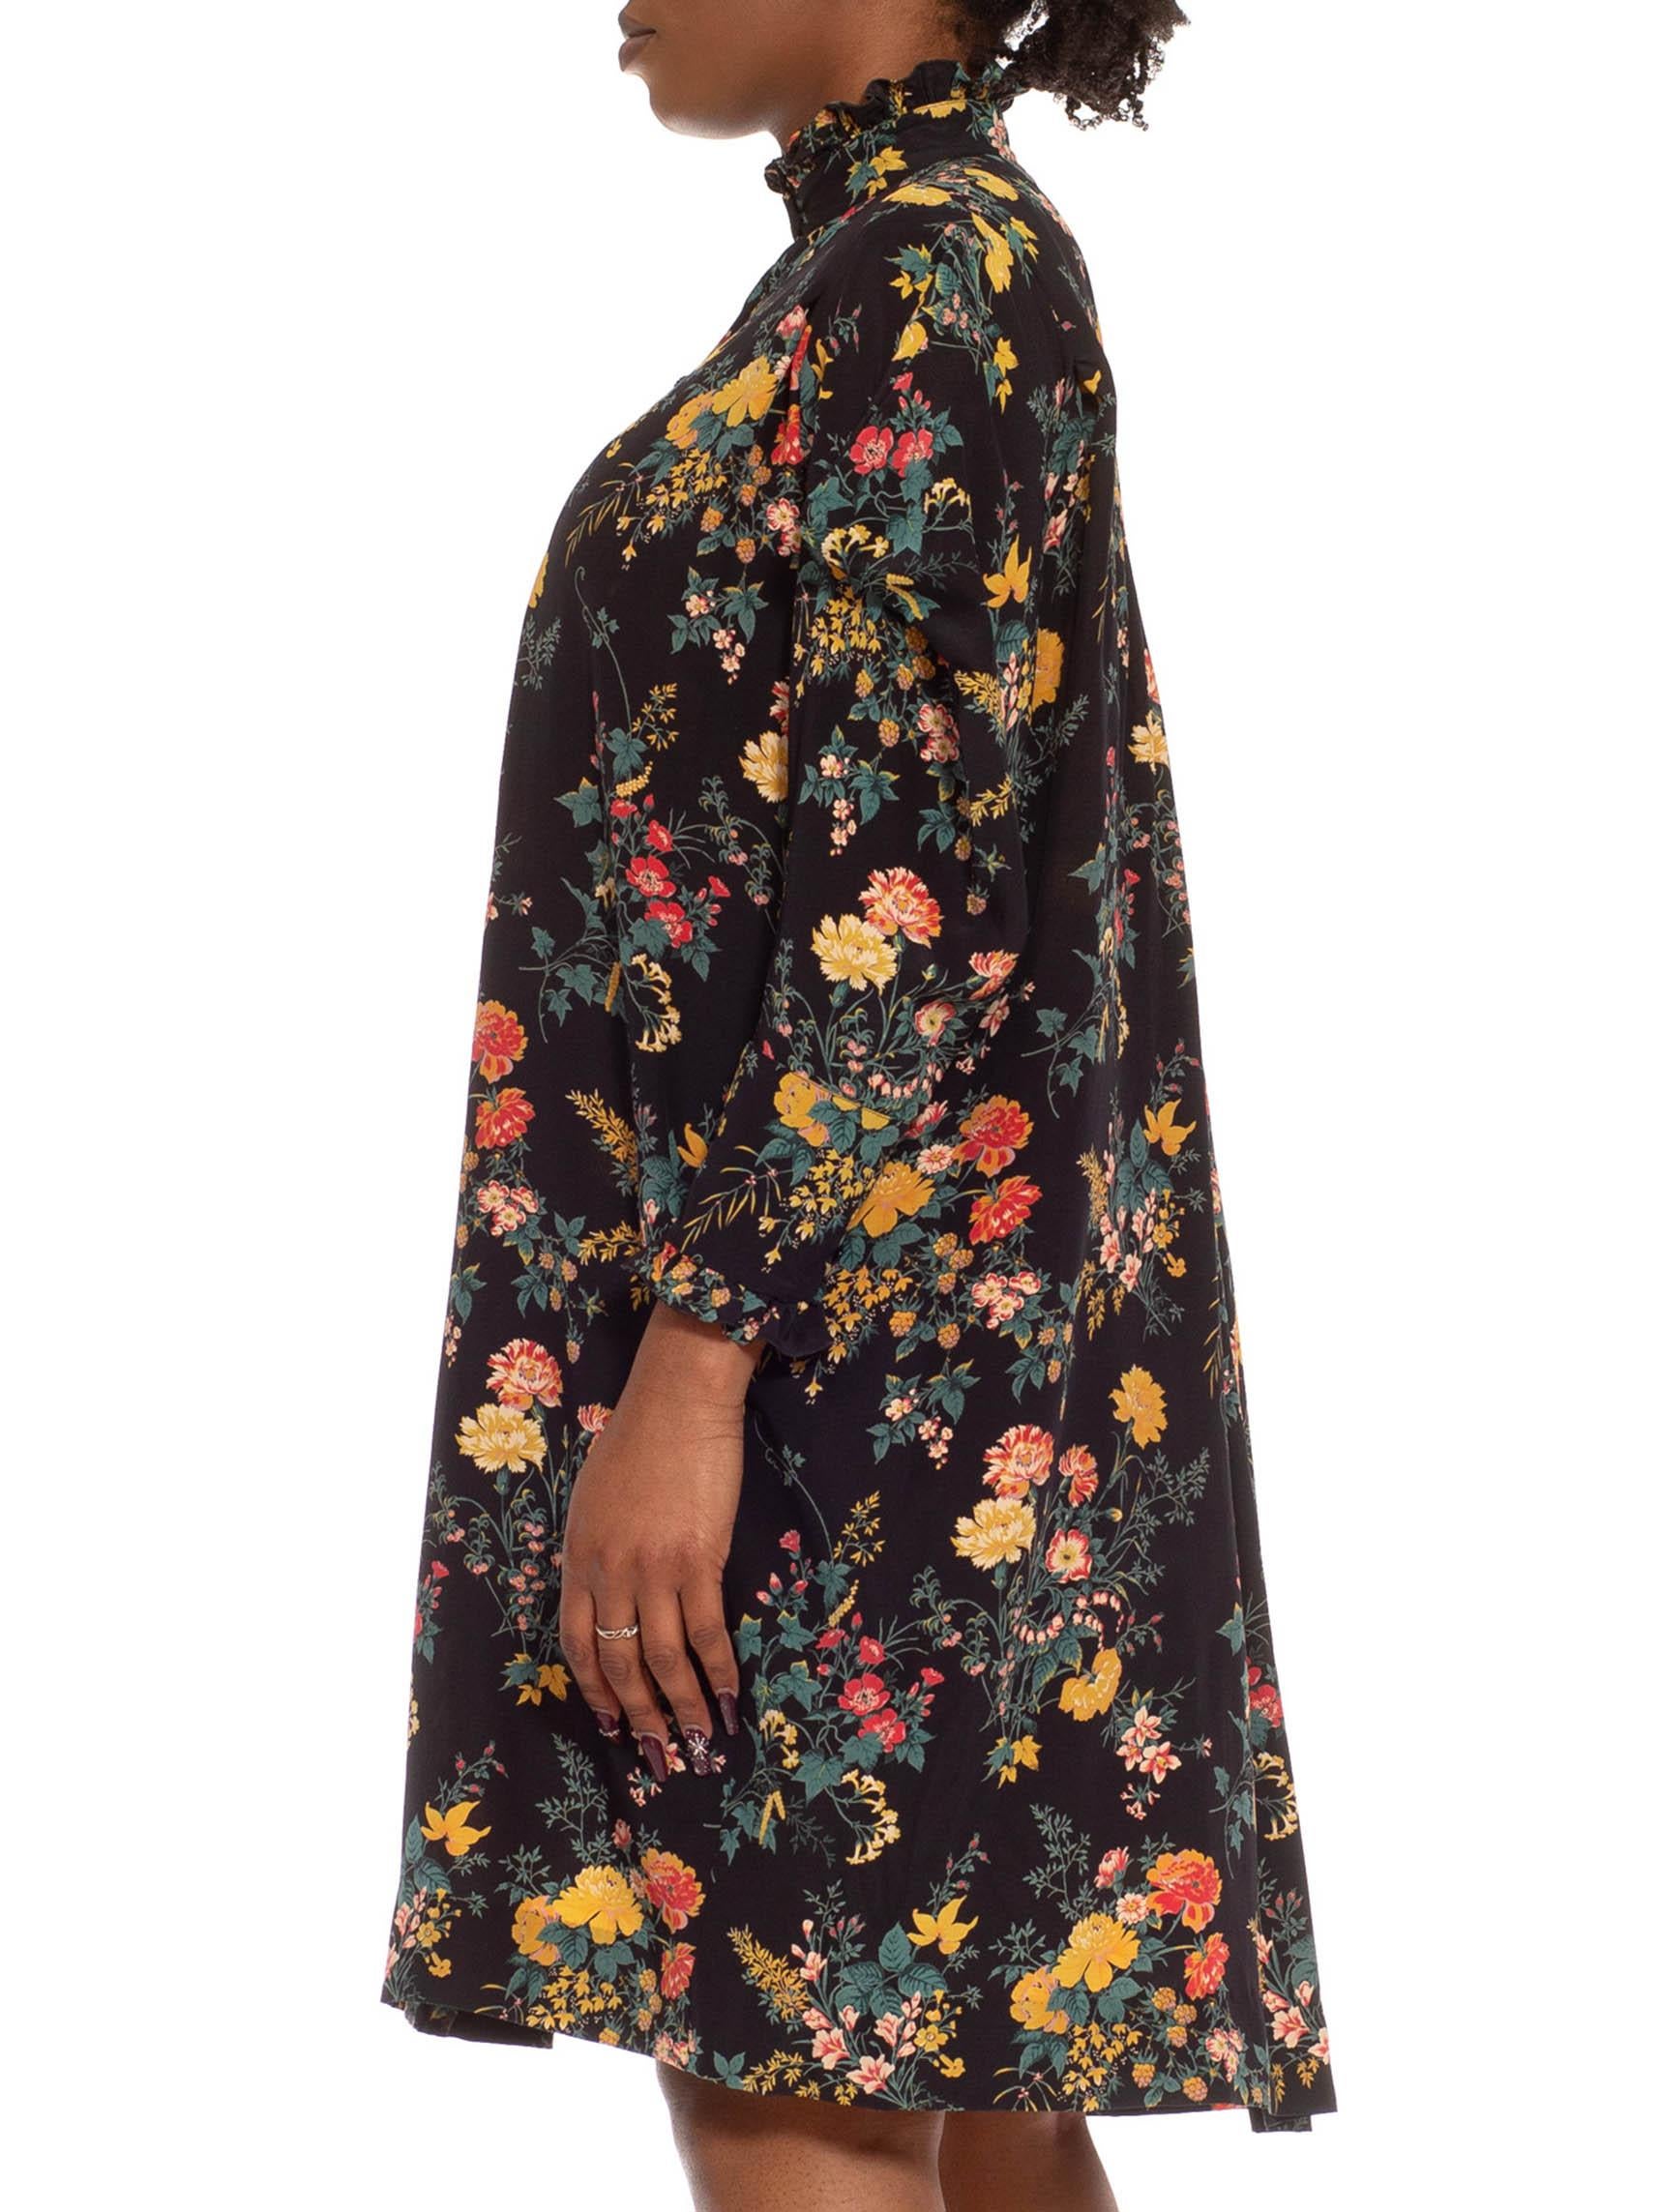 1980S EMANUEL UNGARO Black & Yellow Floral Silk Oversized Boho Dress In Excellent Condition For Sale In New York, NY